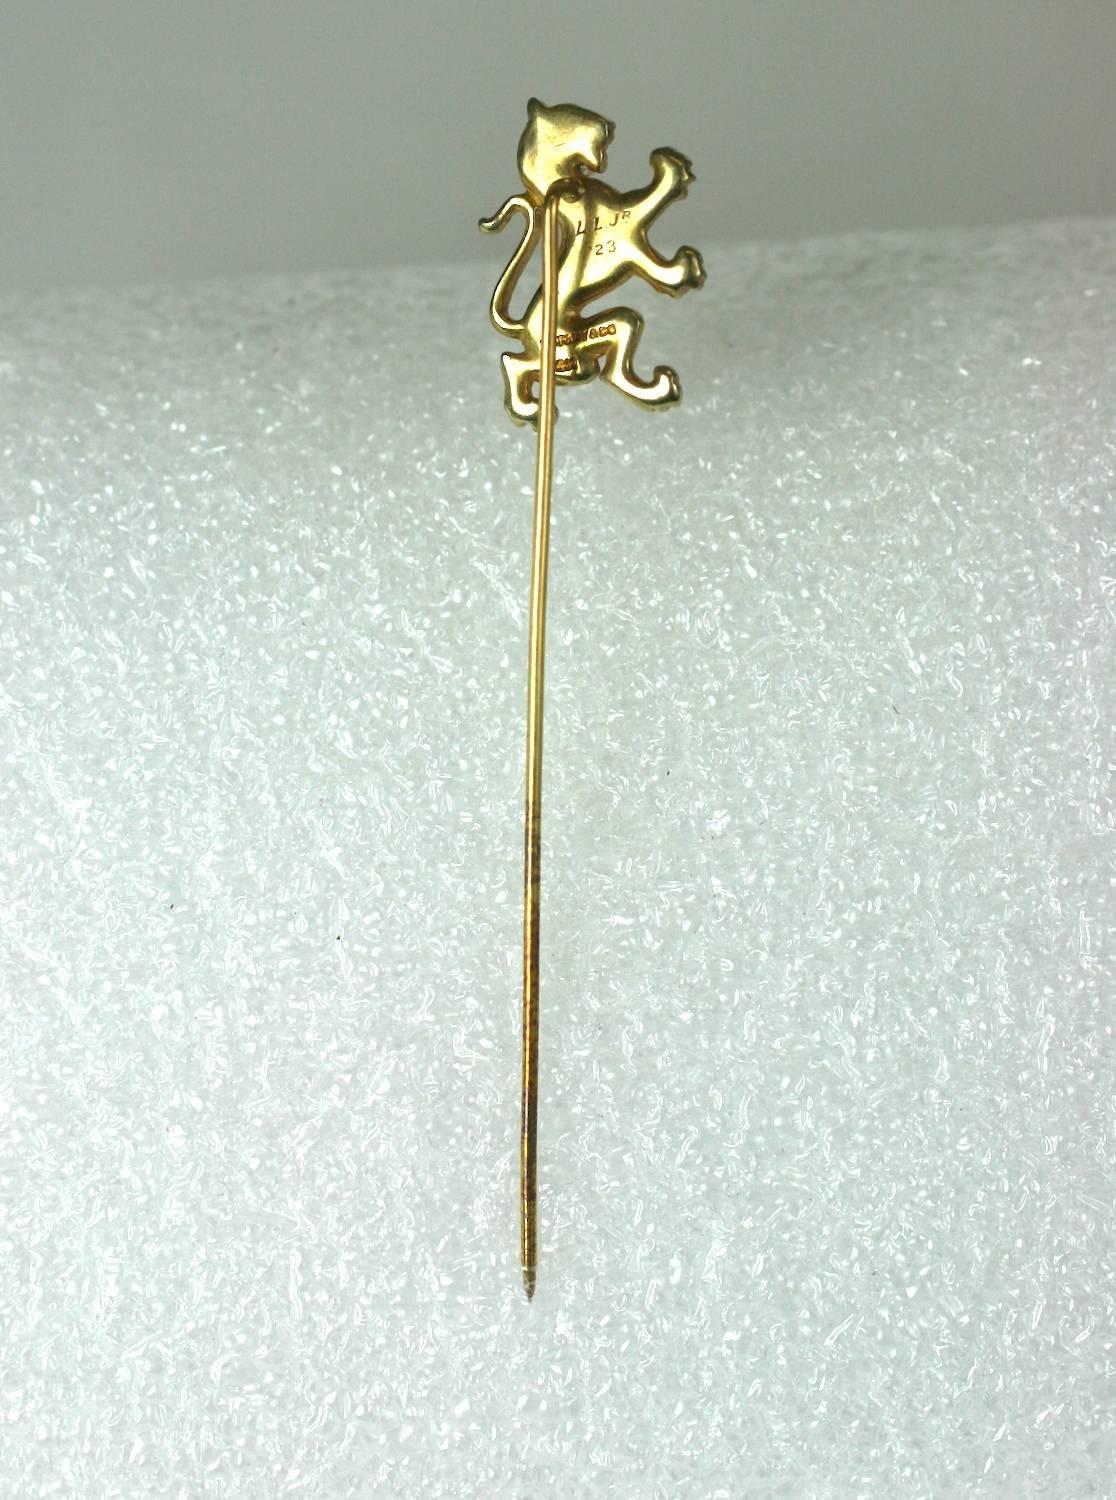 Tiffany and Co. 14 kt gold Lion Passant  stickpin. The strutting lion a common charge in heraldry.
Signed Tiffany and Co, 14 kt. 
Excellent Condition. Lovely quality, 1920's USA.
3" x .5"